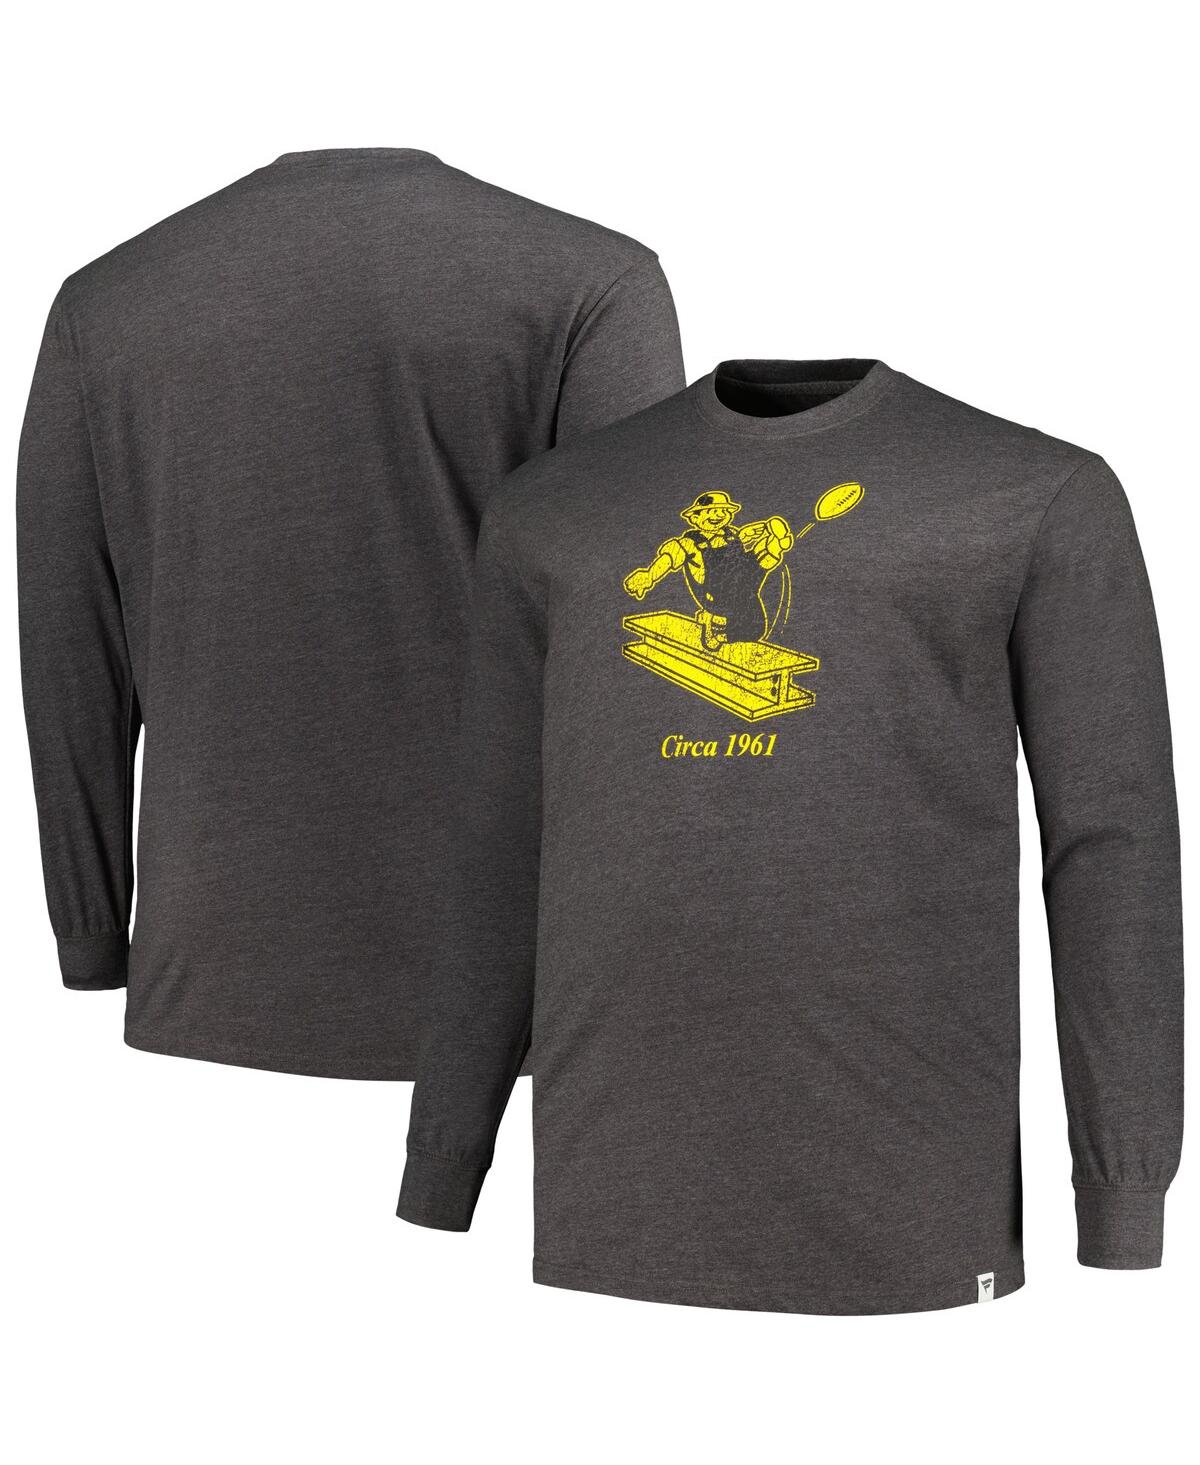 Men's Profile Heather Charcoal Distressed Pittsburgh Steelers Big and Tall Throwback Long Sleeve T-shirt - Heather Charcoal